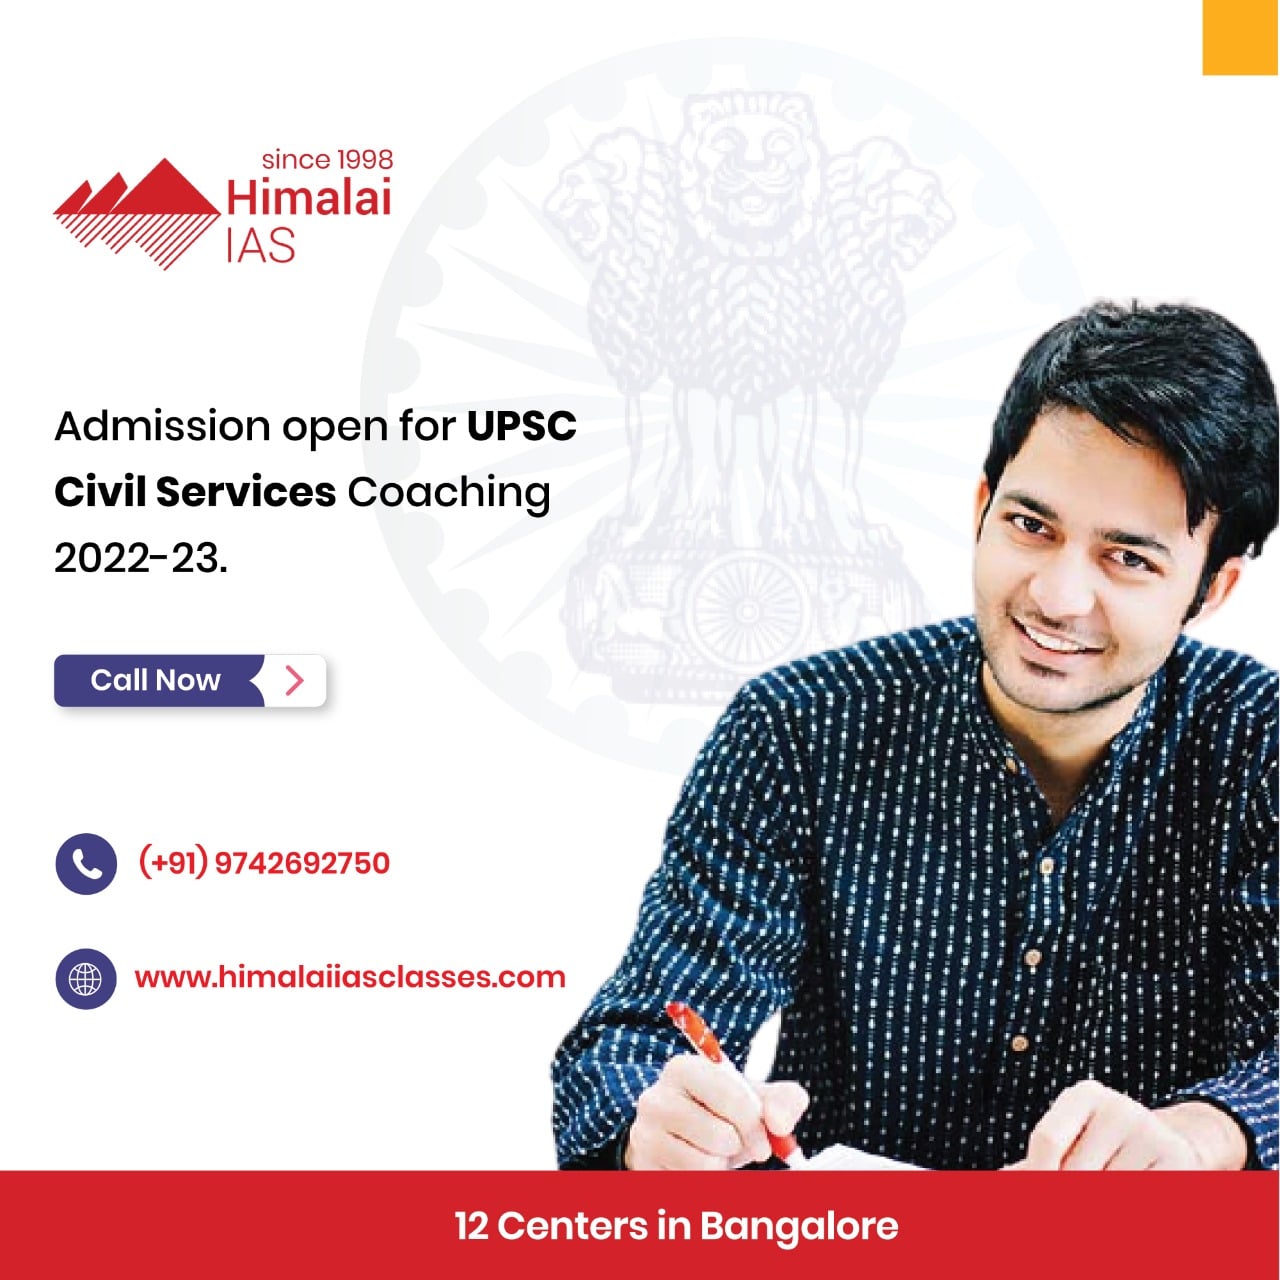 Get enroll now for UPSC coaching with the Best UPSC coaching in BangaloreEducation and LearningCoaching ClassesAll Indiaother